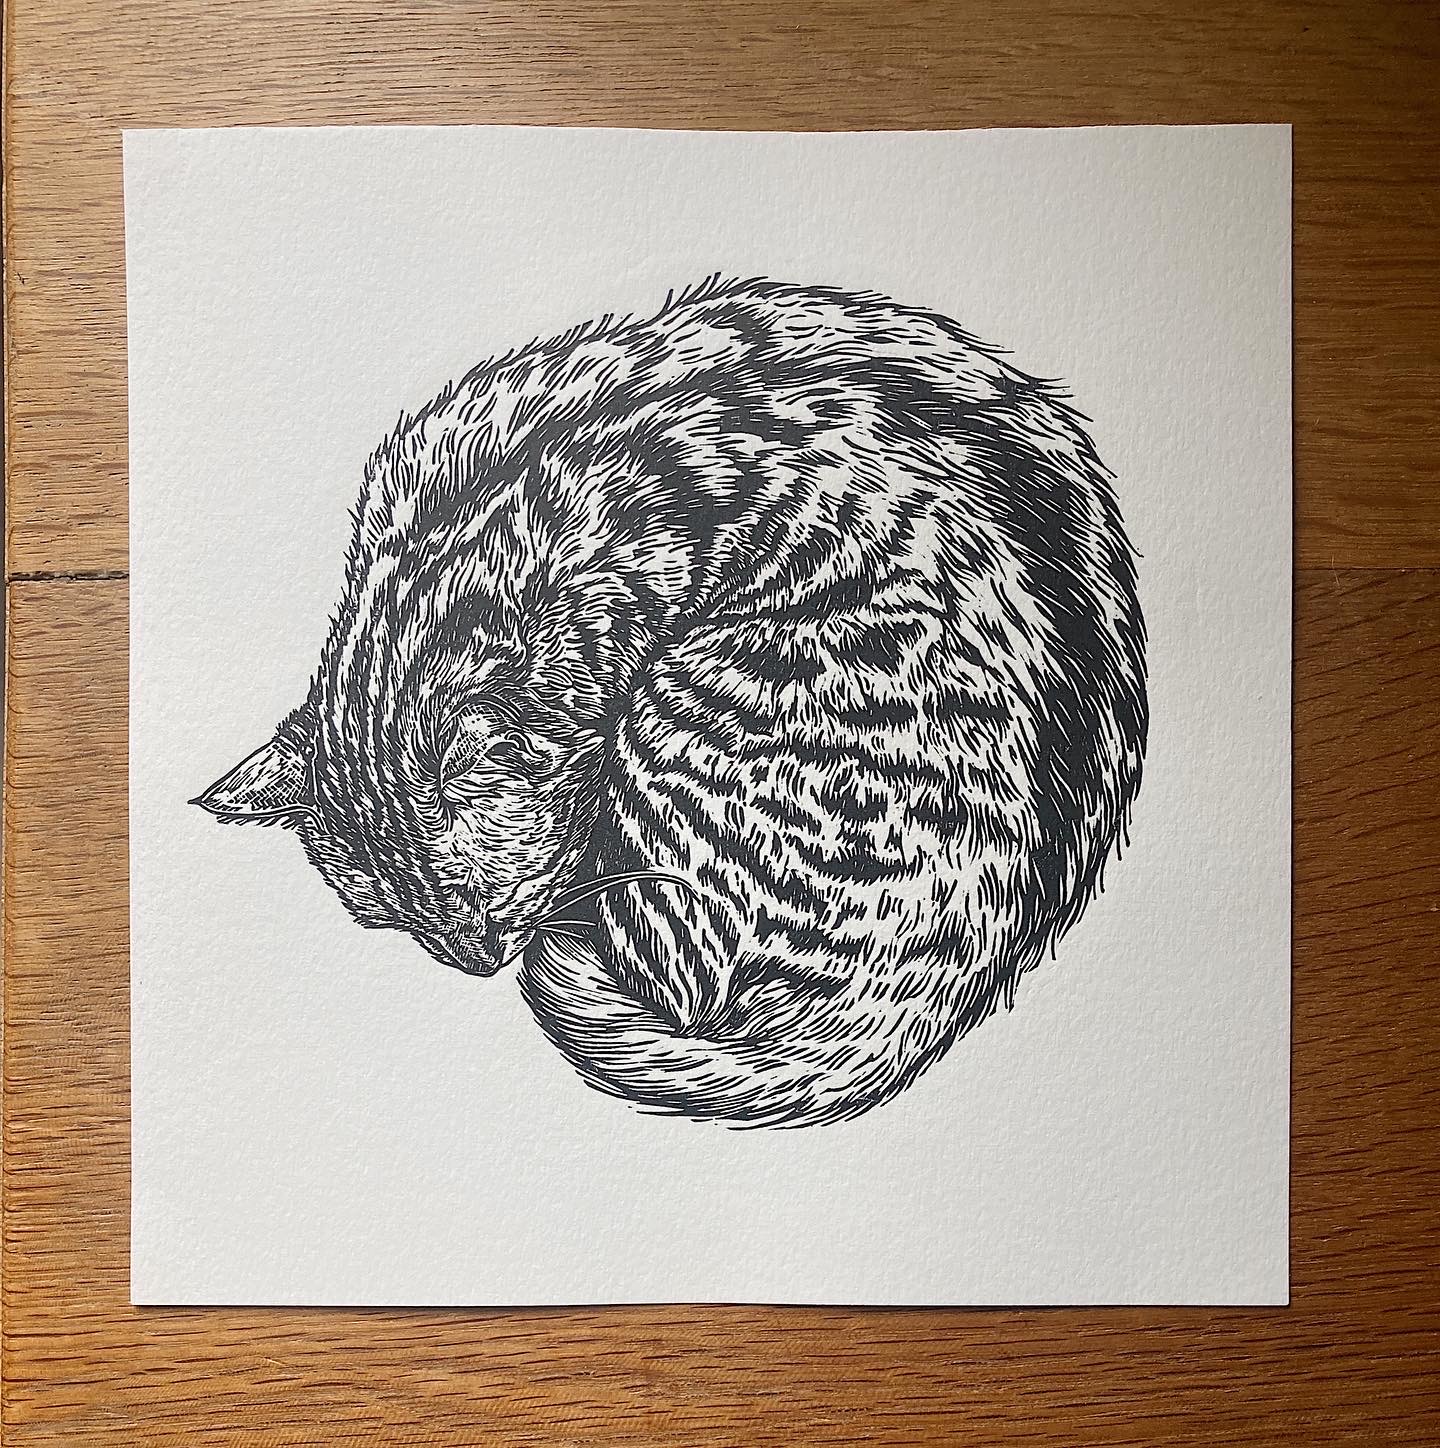 Lino print in black and white of a sleeping cat.